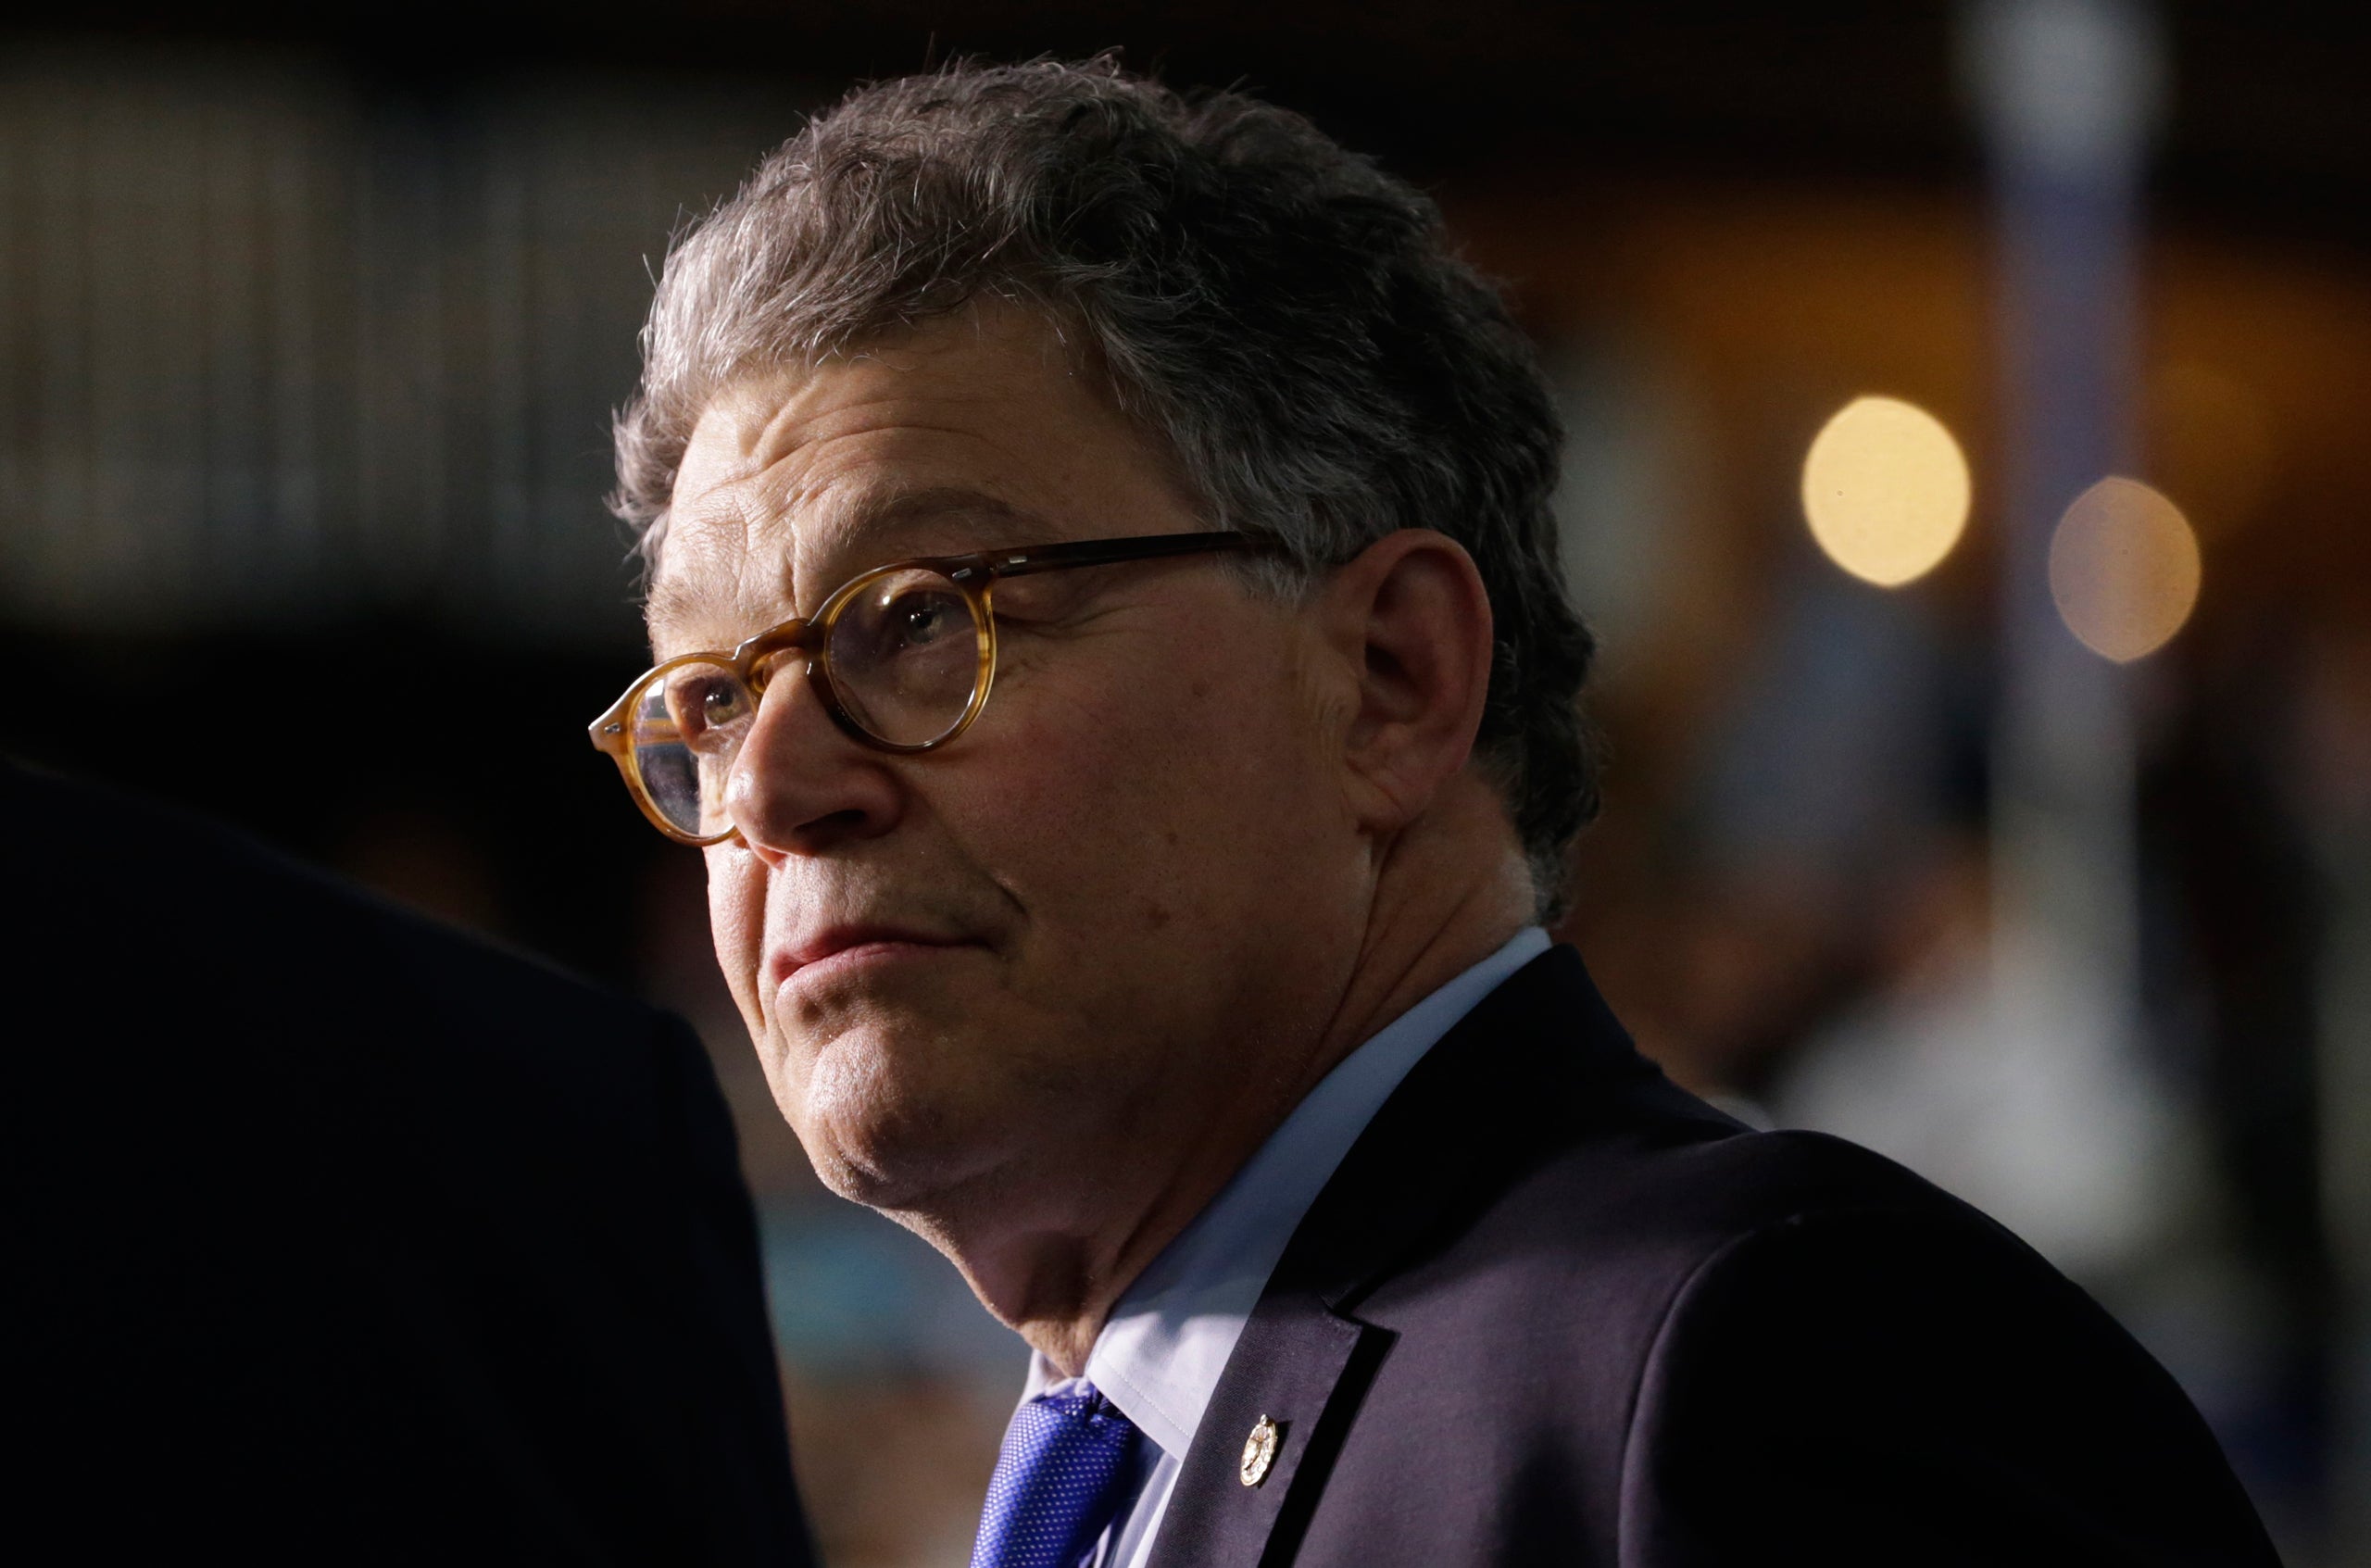 Al Franken Just Resigned Amid Sexual Harassment Allegations. Here's What Happens Now
